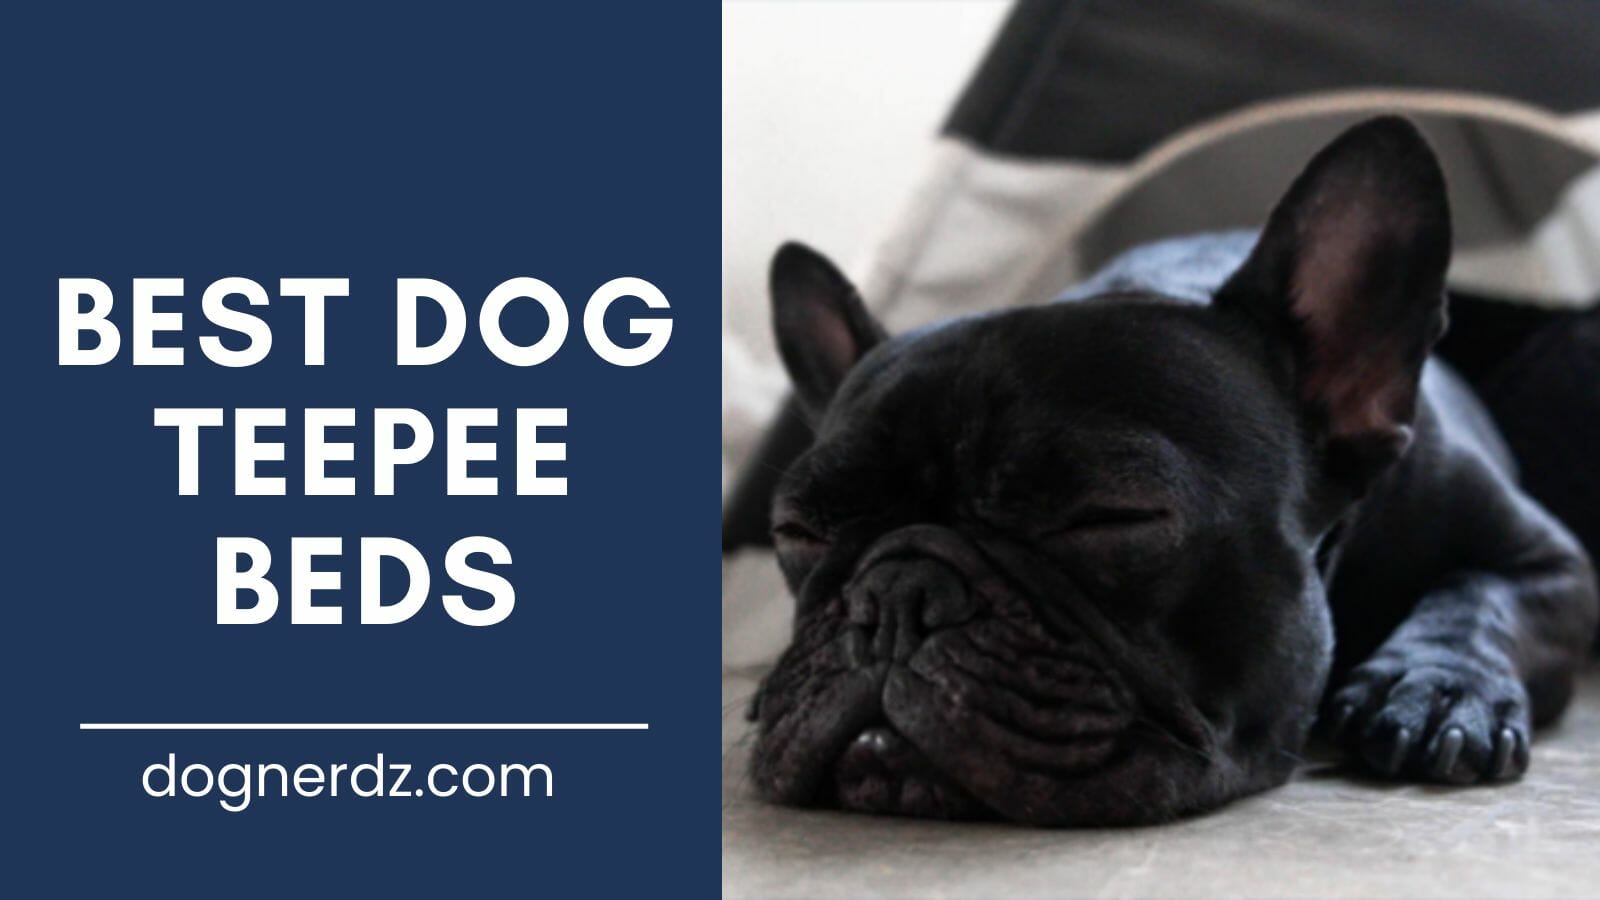 review of the best dog teepee beds